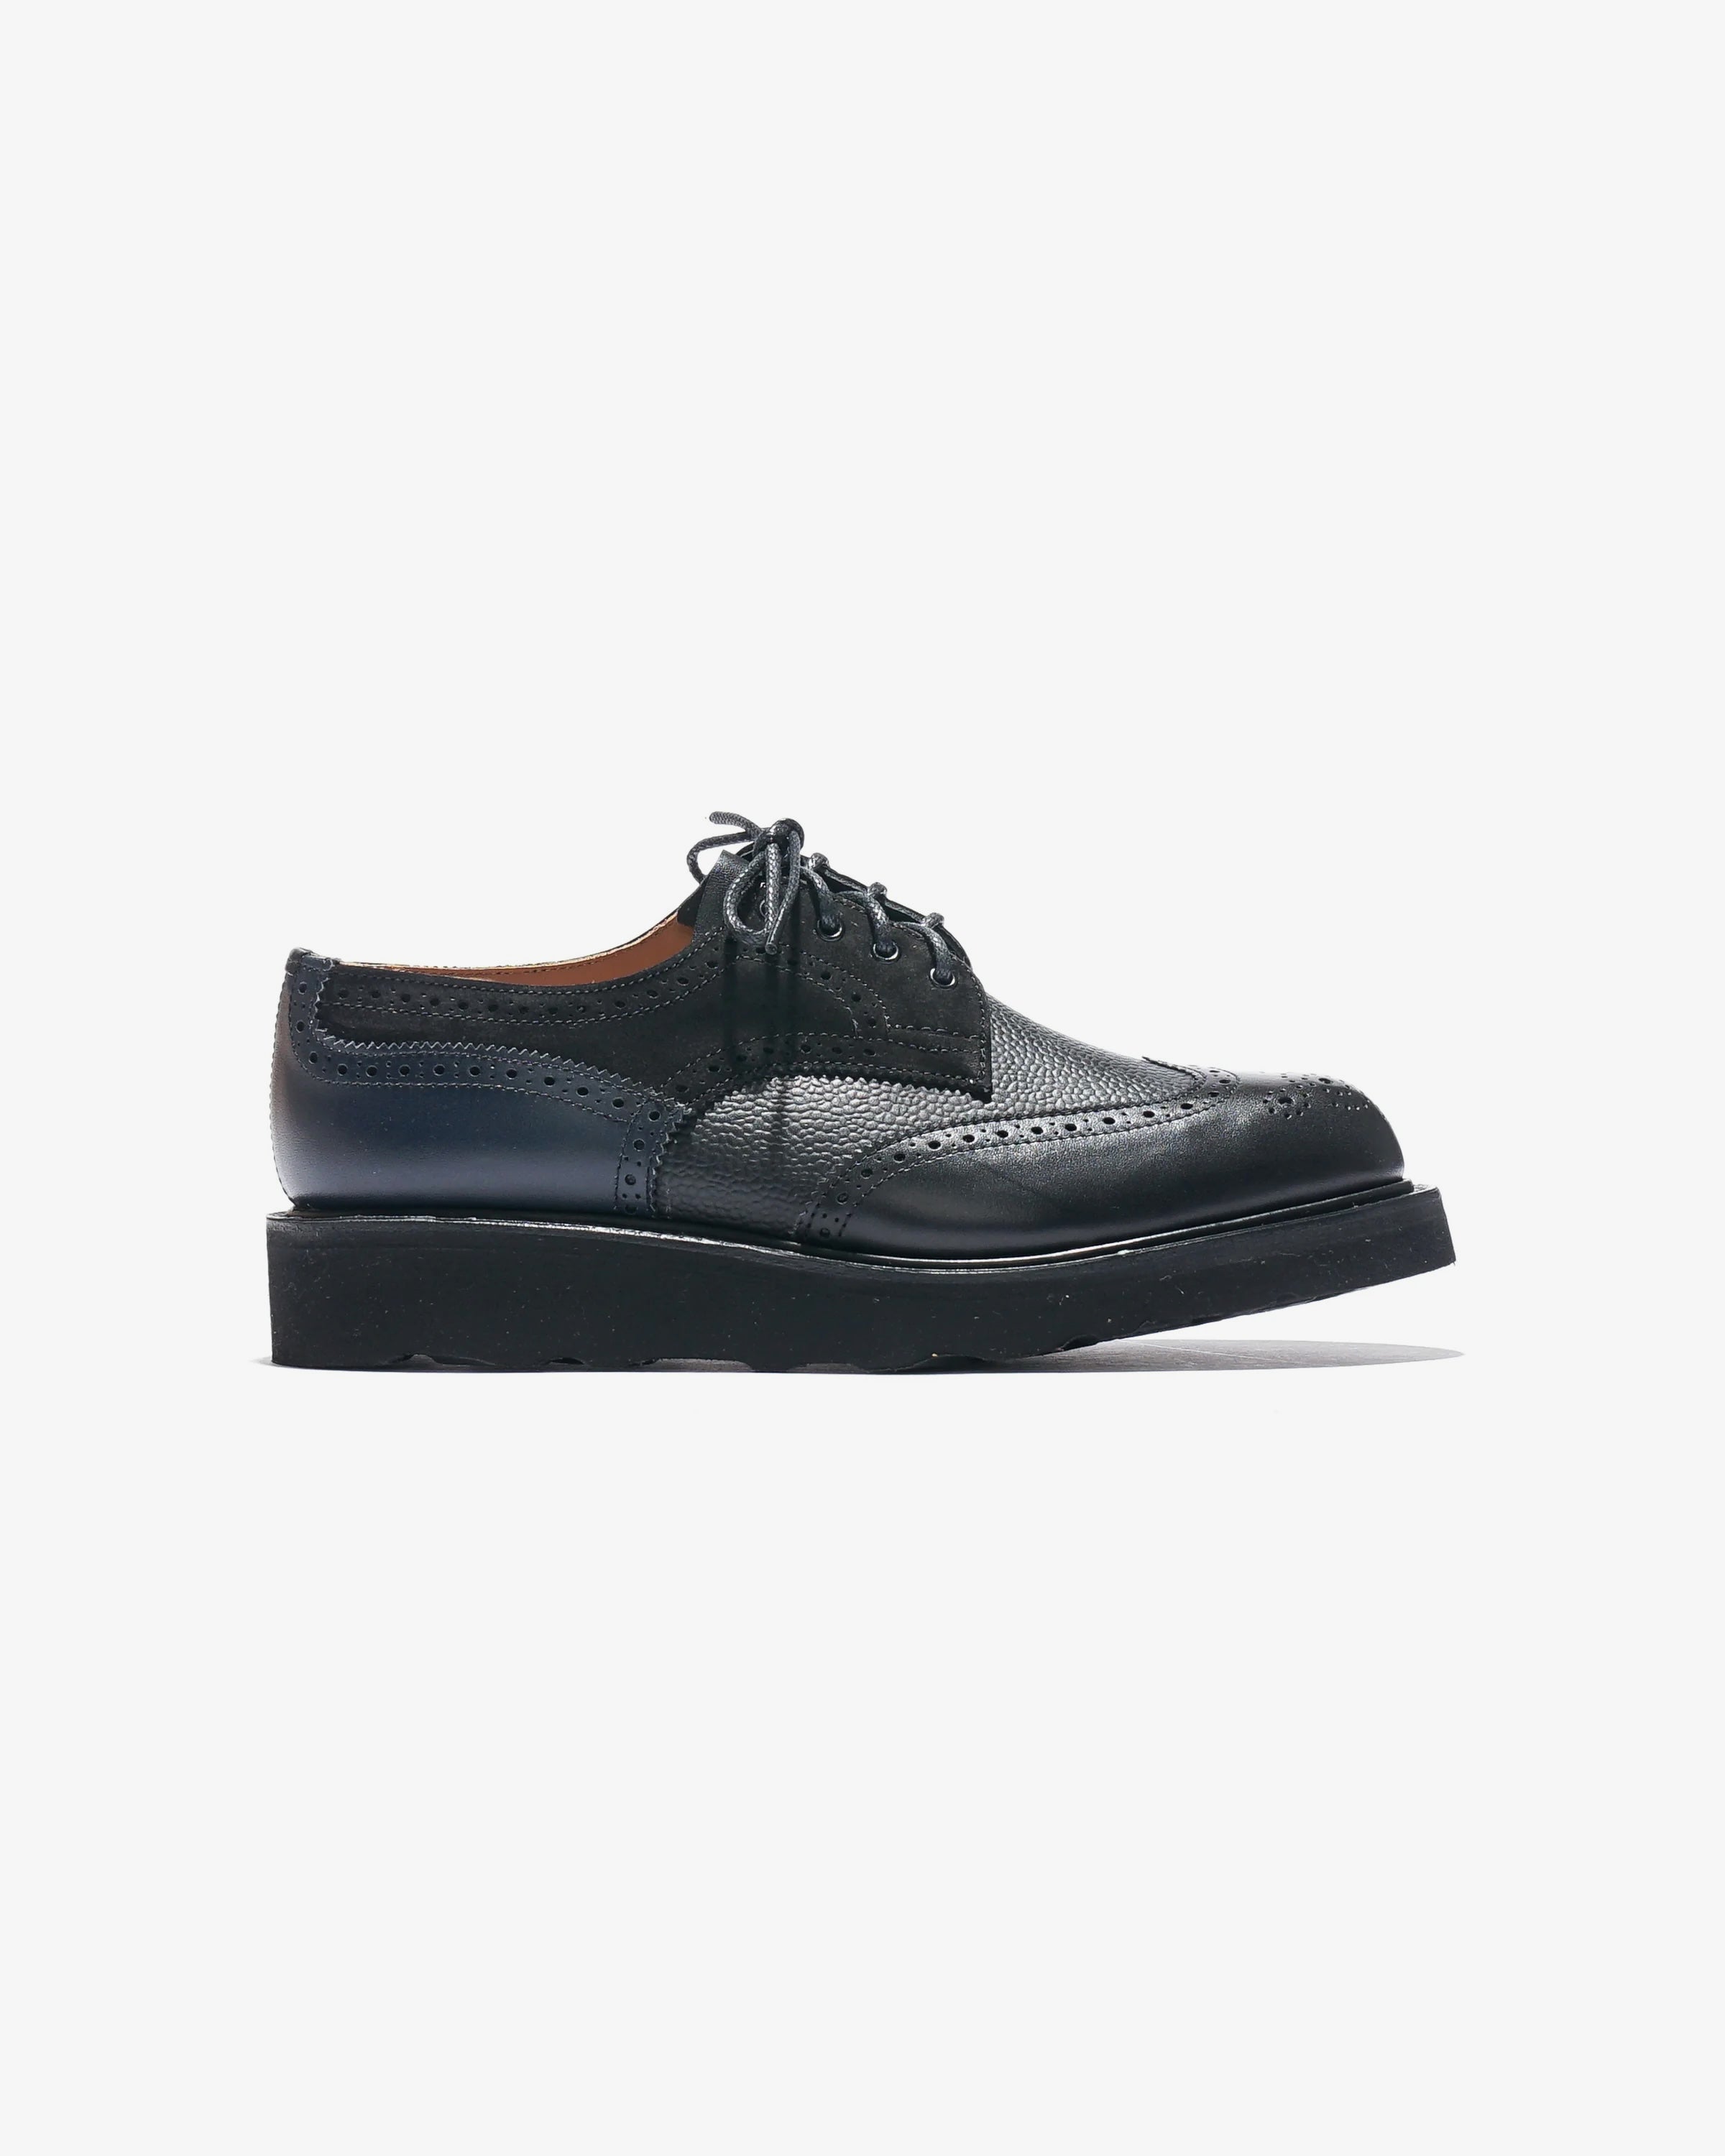 Tricker's x Nepenthes Multi-Tone Derby - Moreflex Sole - Black – Tricker's x Nepenthes – Nepenthes London